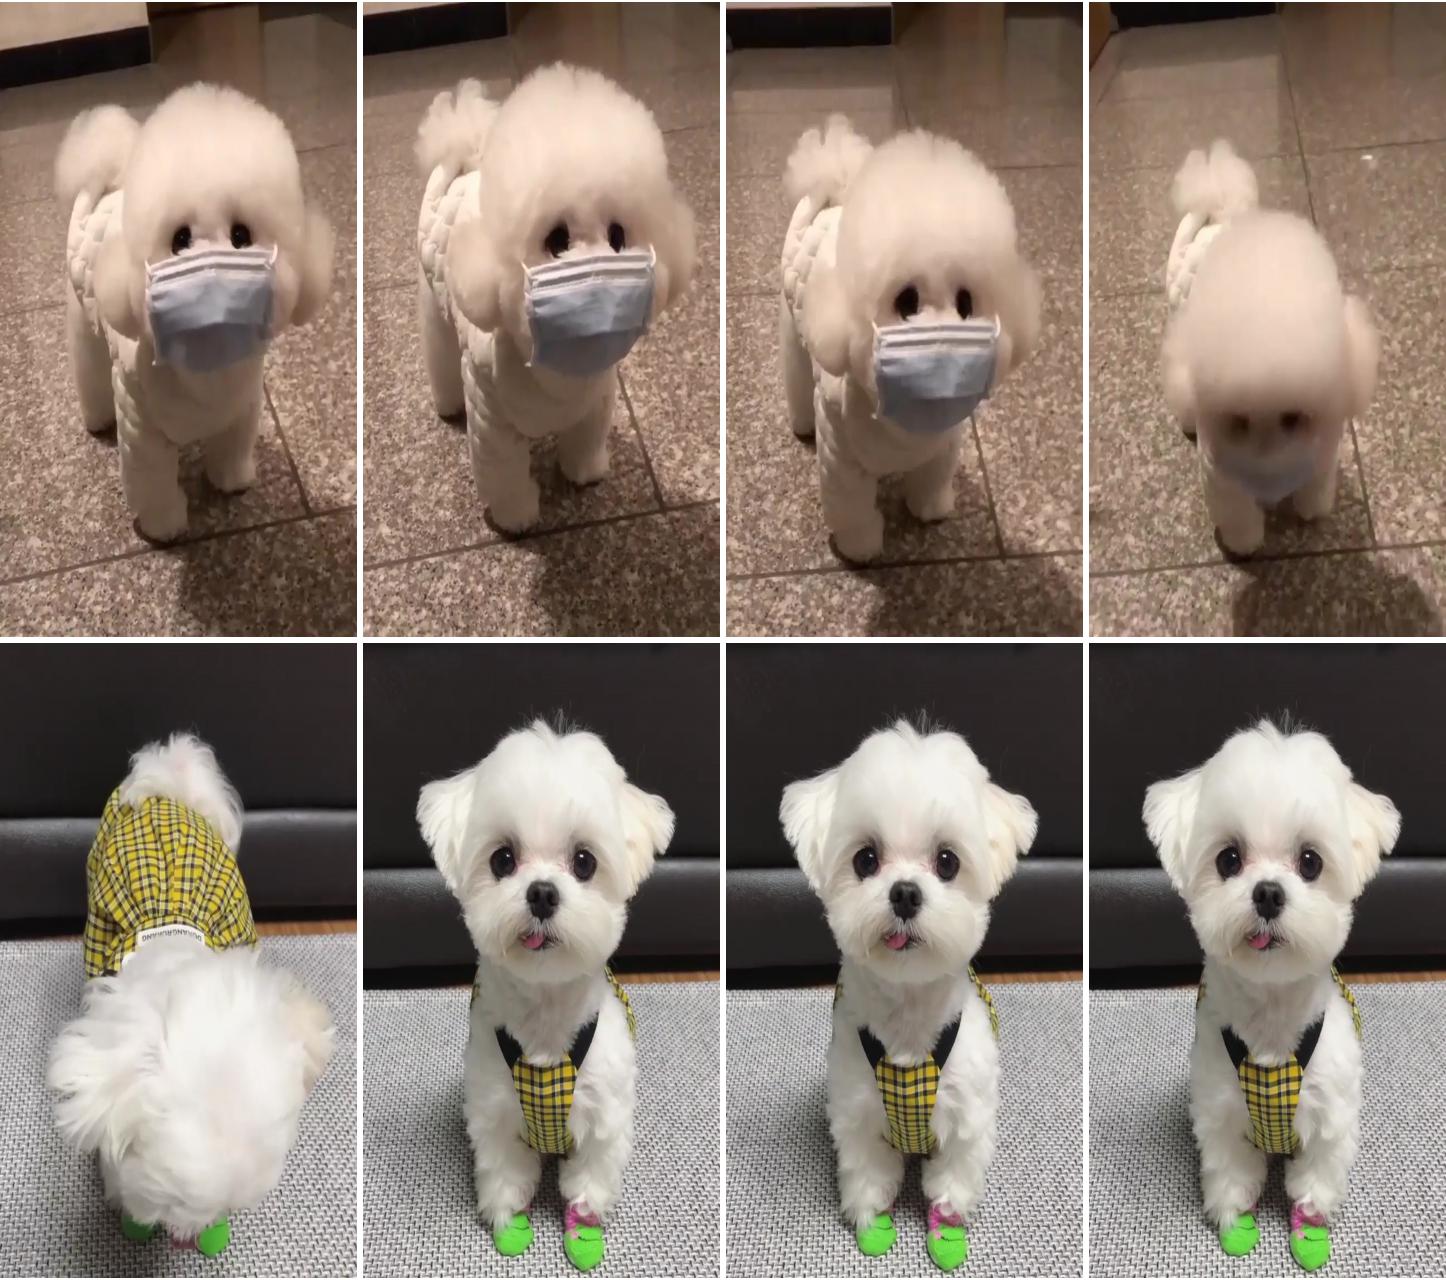 Dog giving social message to wear mask and stay protected; so adorable maltese puppy 